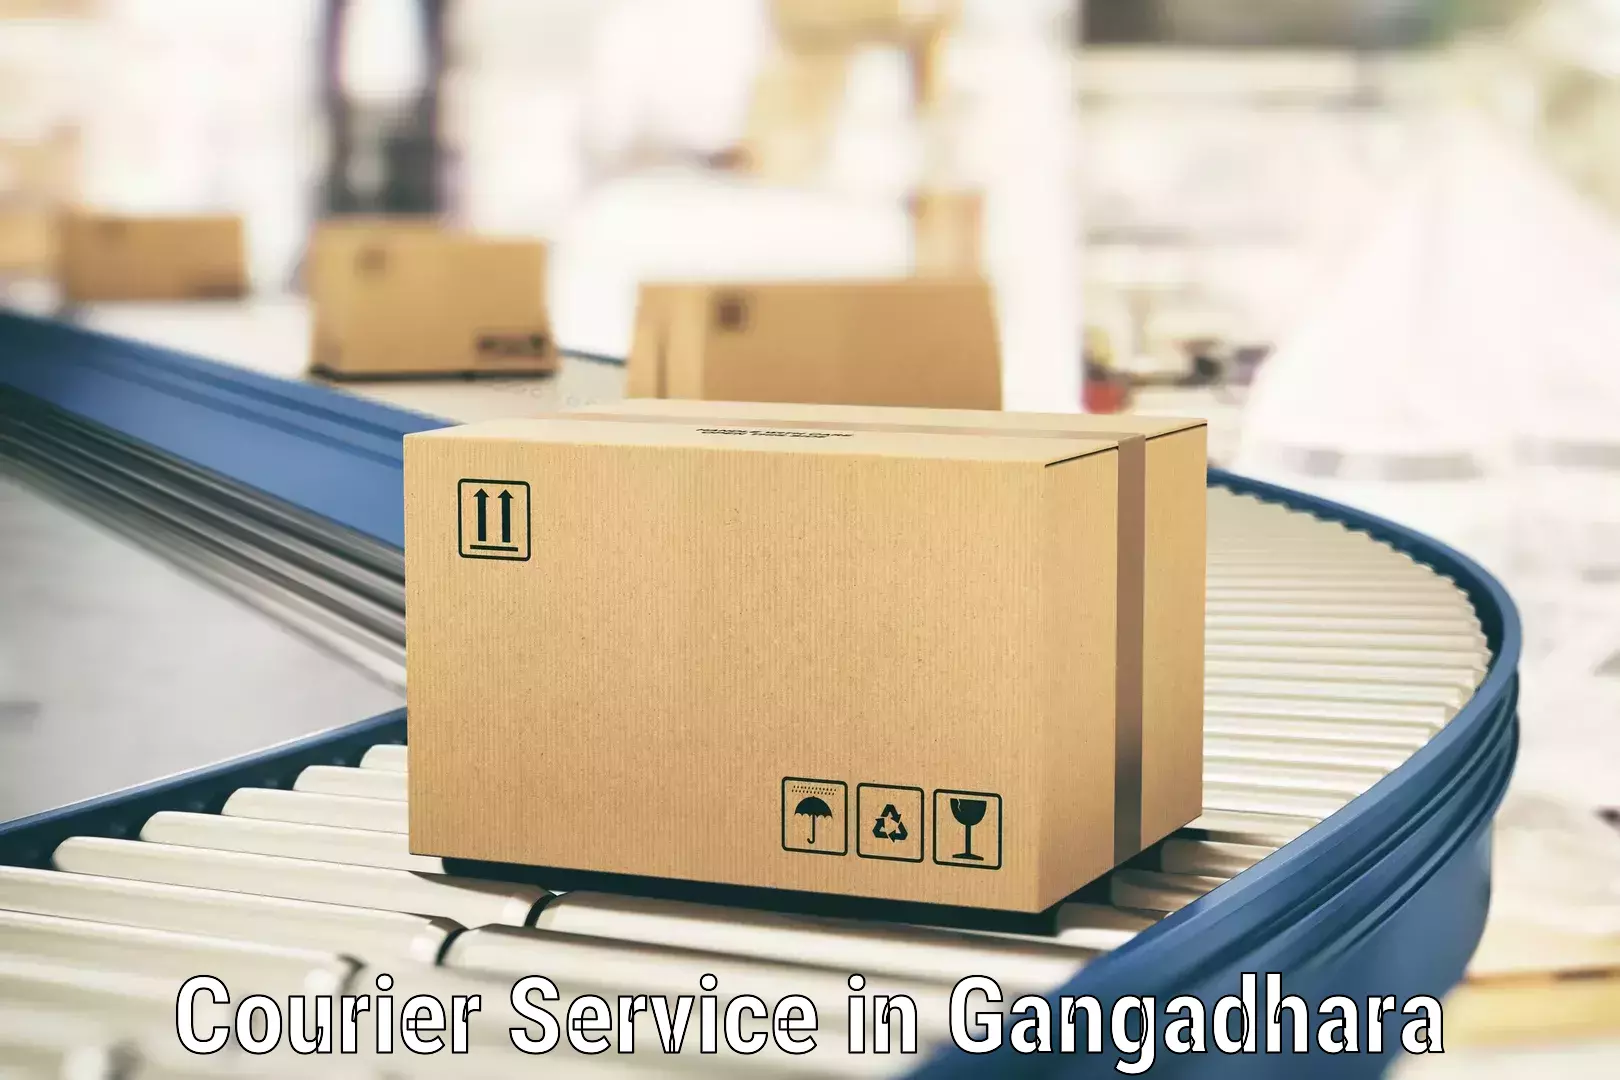 Fast delivery service in Gangadhara